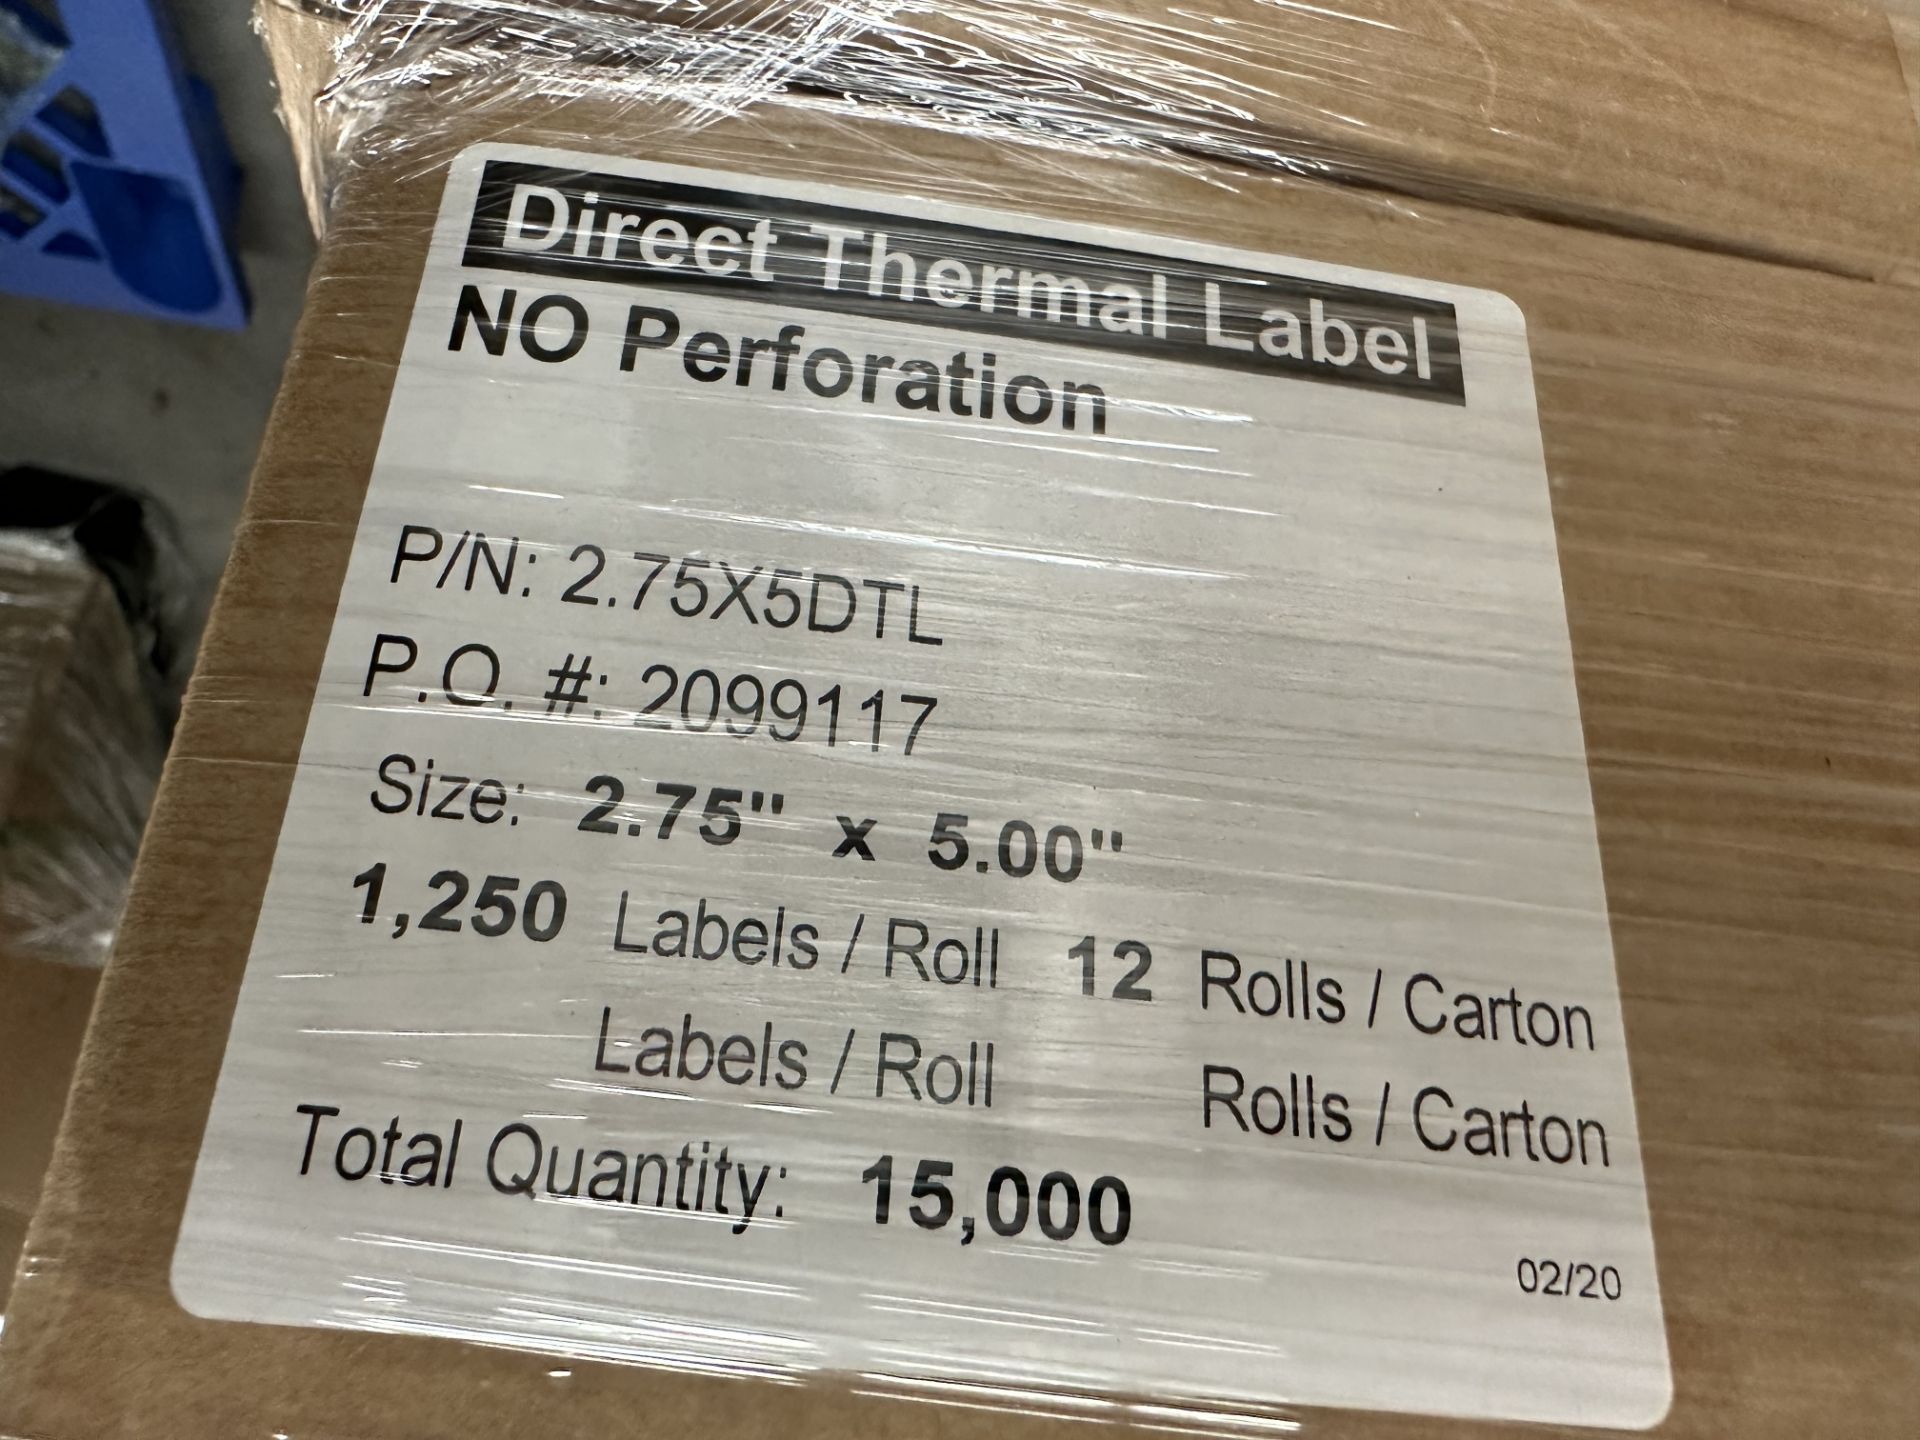 (18 Cases - SELLING PER CASE) Cases Direct Thermal Labels P/N: 2.75X5DTL, 2.75" x 5" (15,000 Per Cas - Image 2 of 2